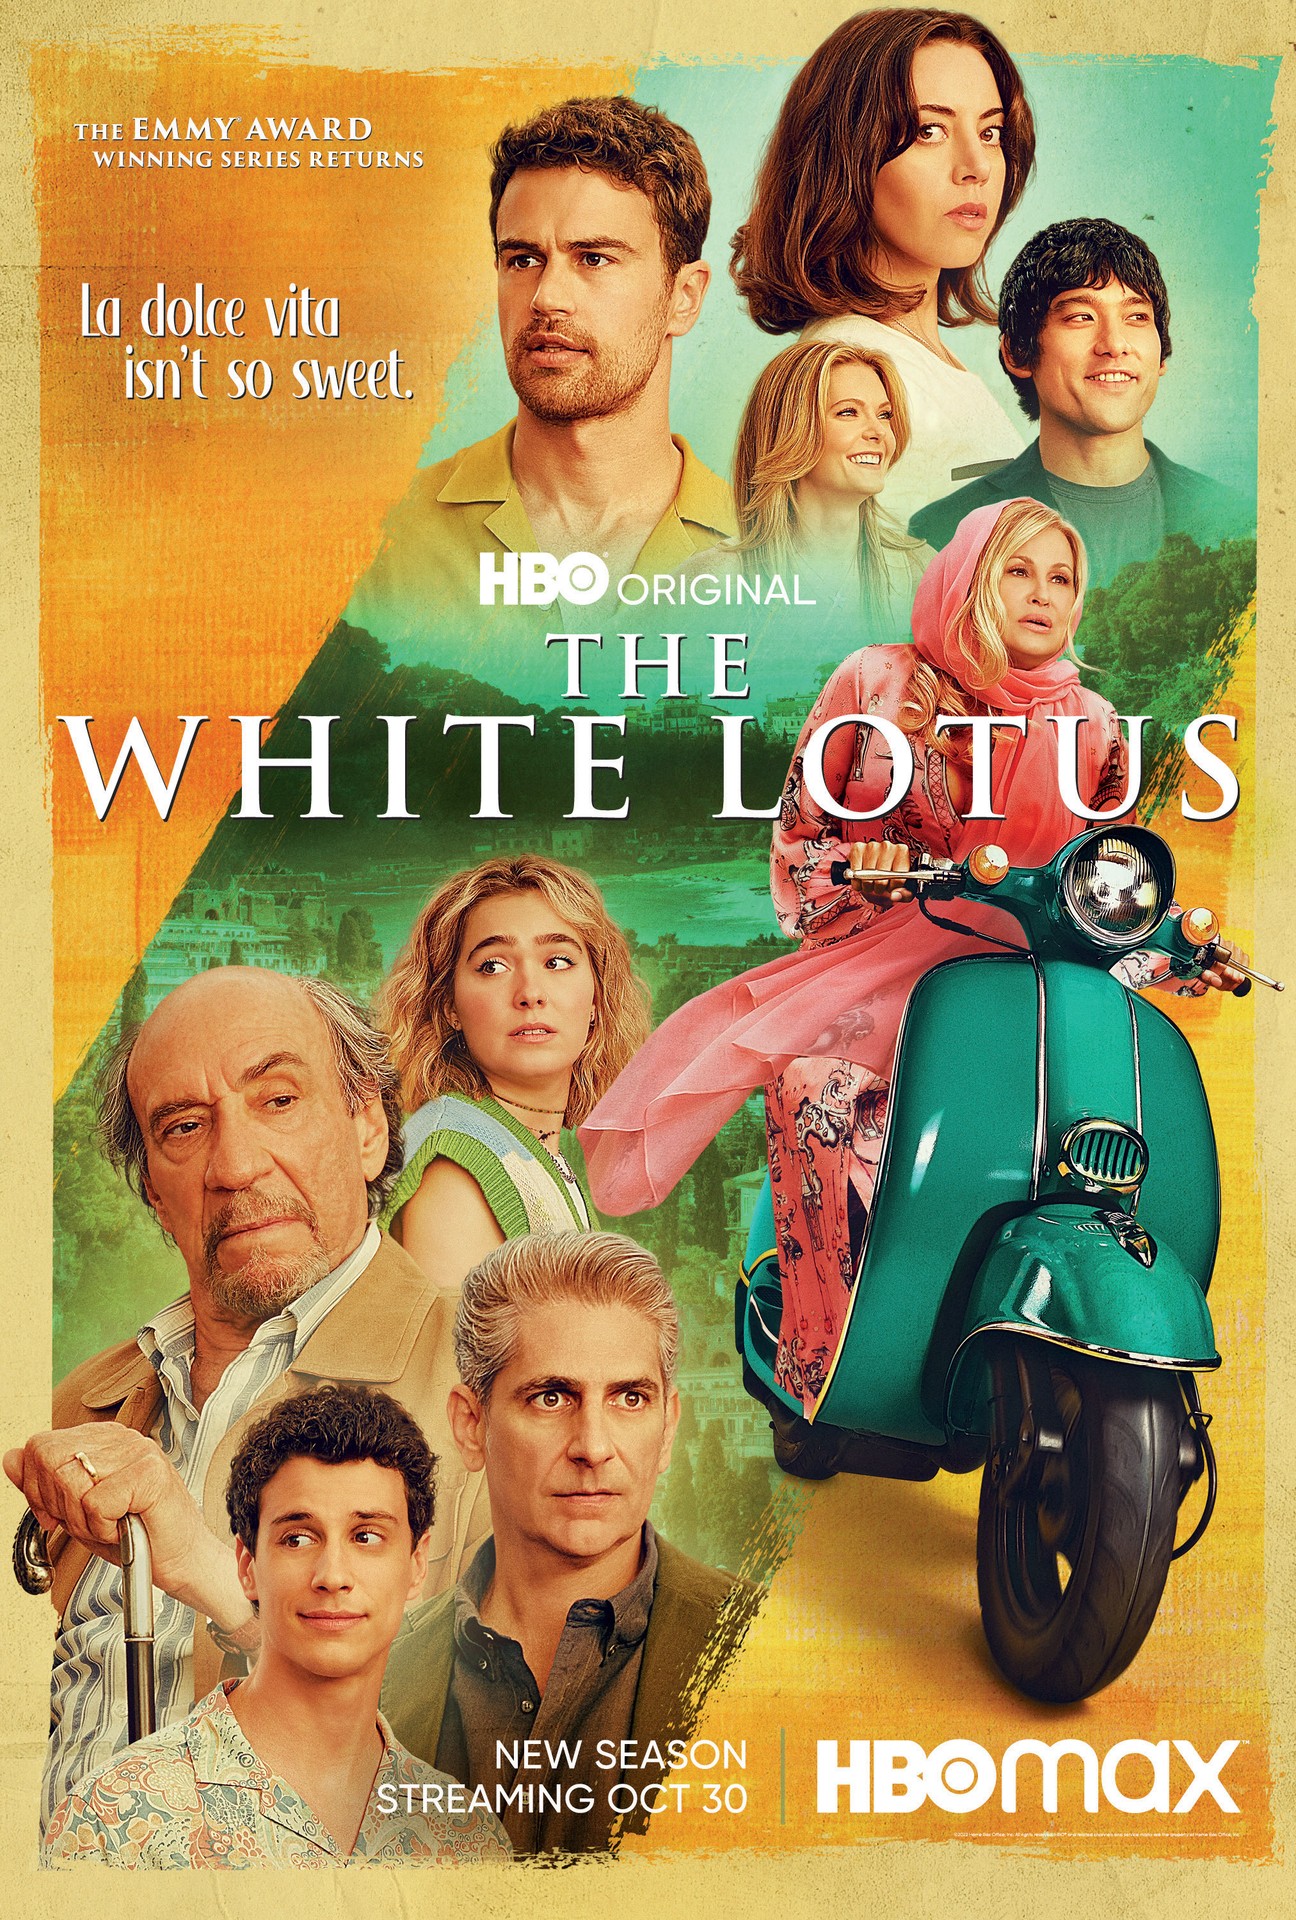 The White Lotus' Season 2 Trailer Teases 'A Memorable Time' at the